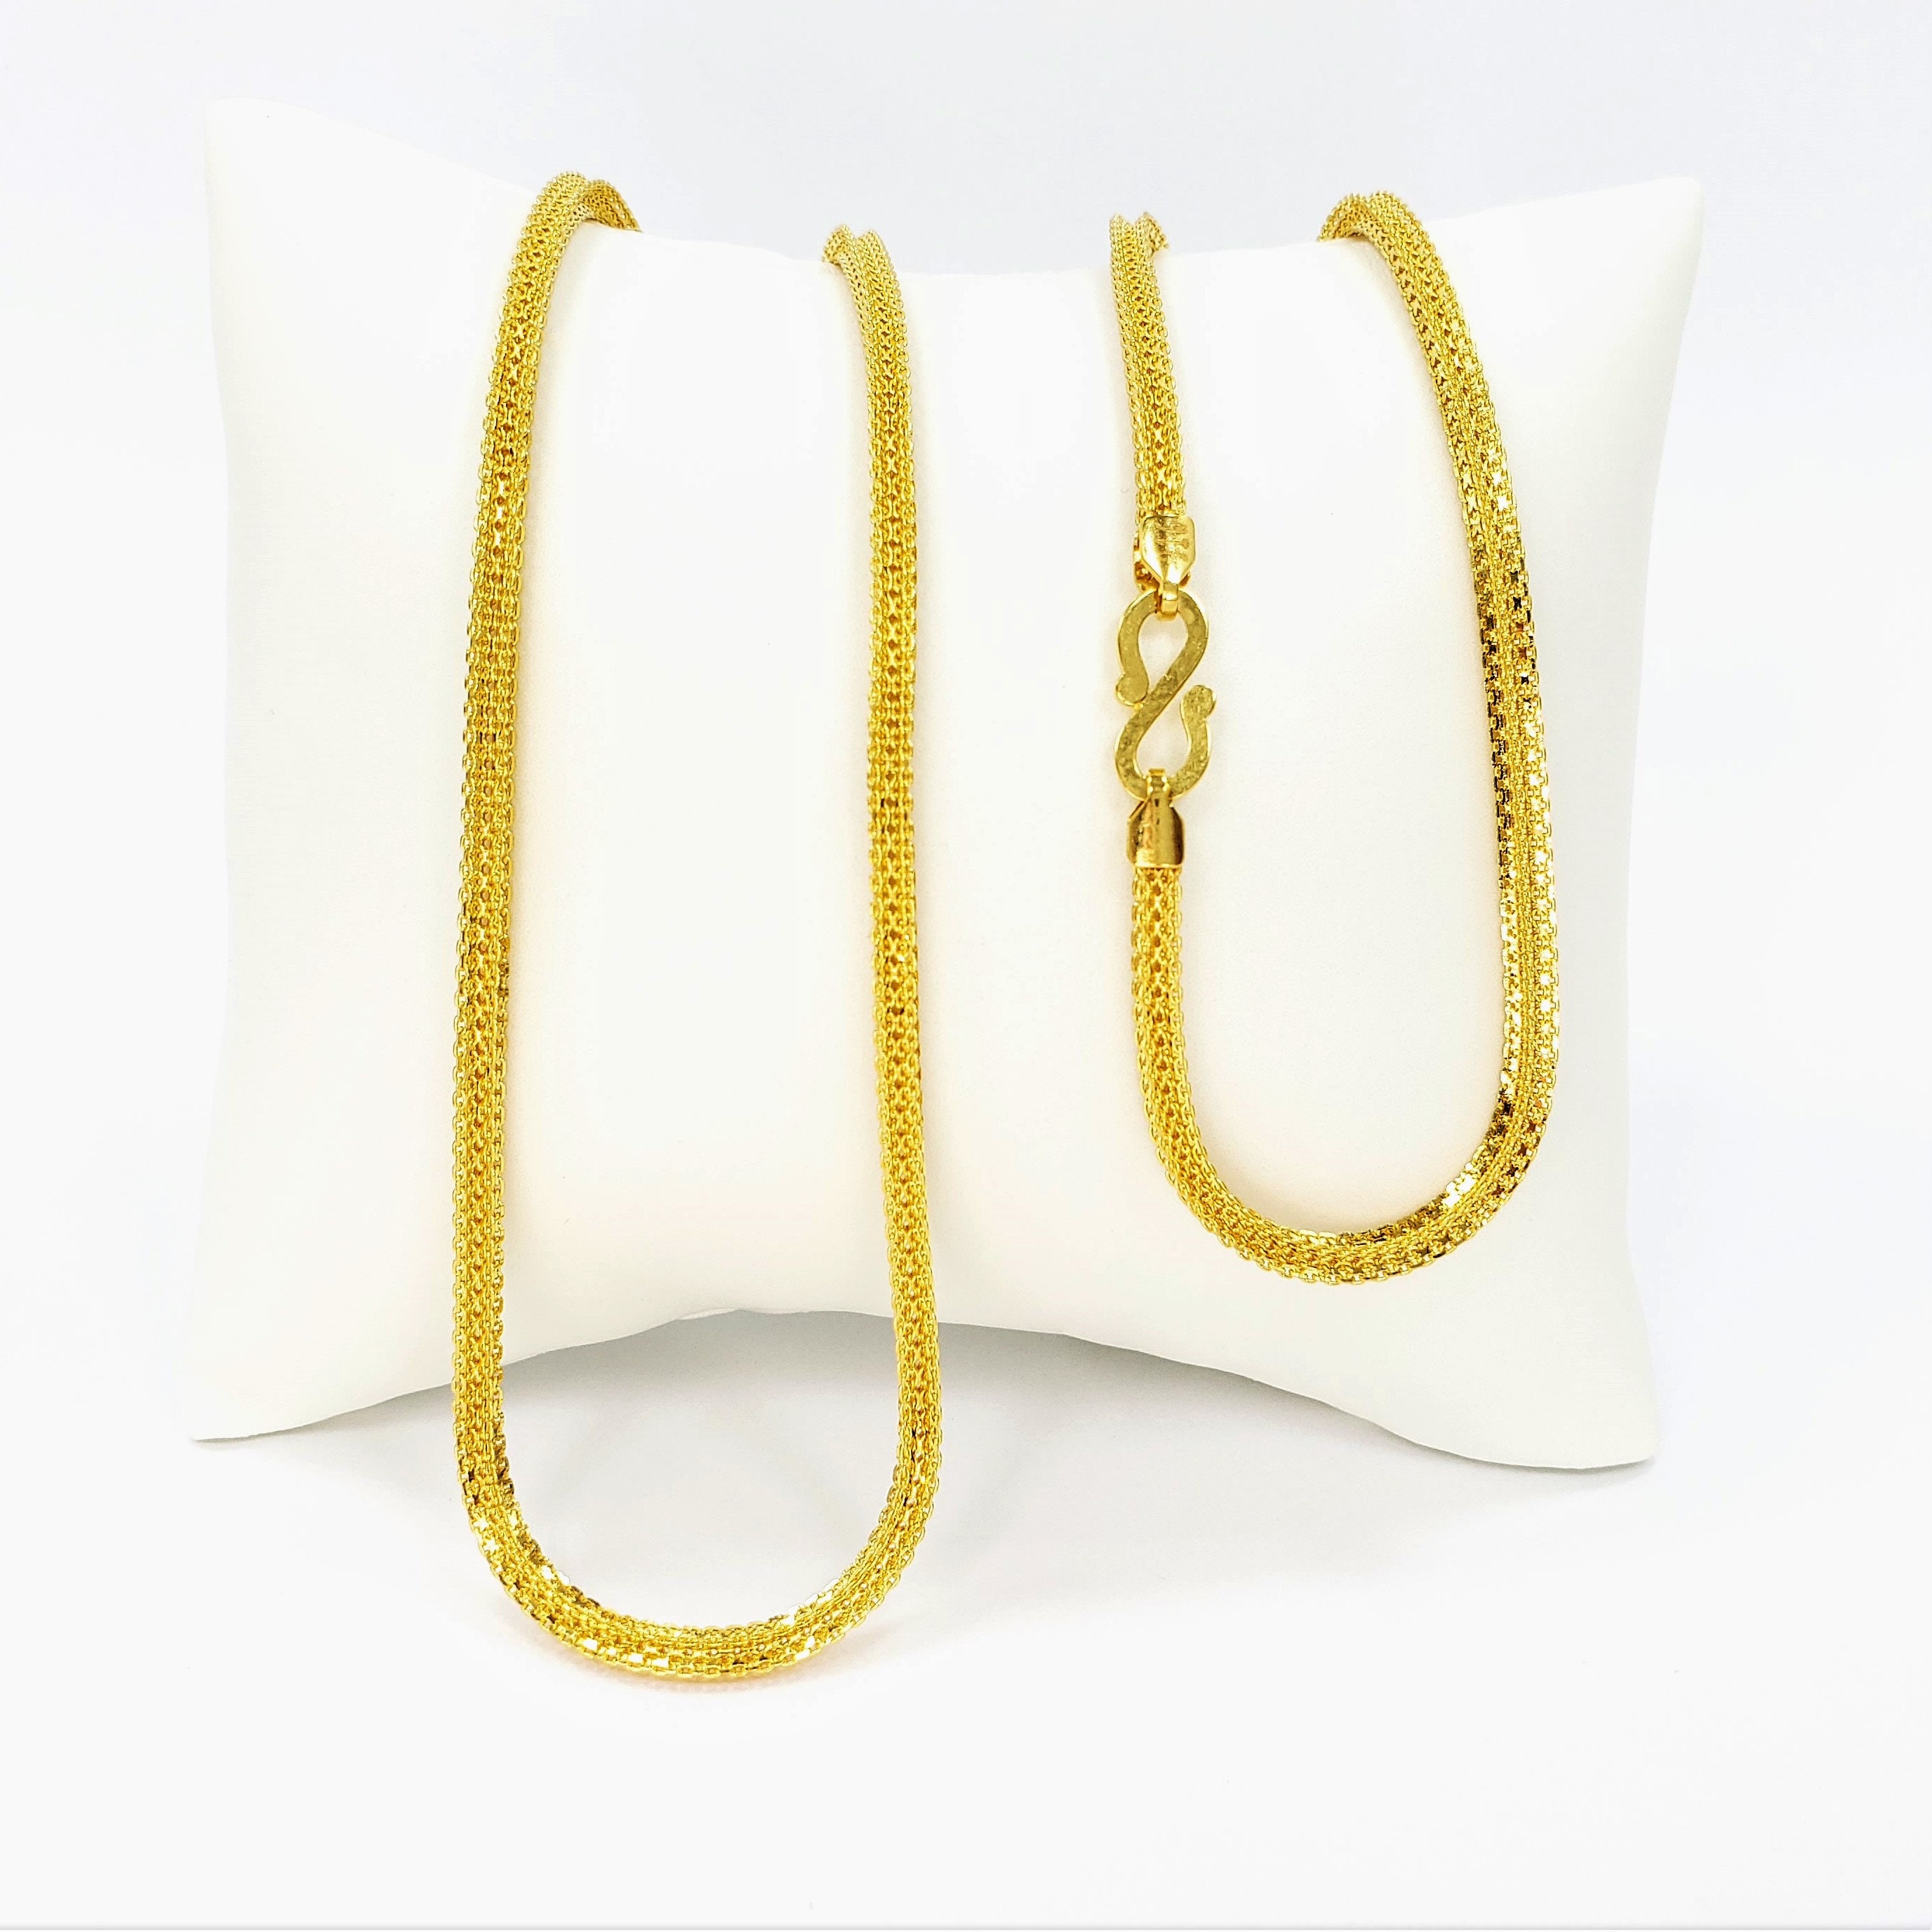 Solid 24K Yellow Gold S W Hook Clasp Fix Necklace Bracelet 3 Design  Available